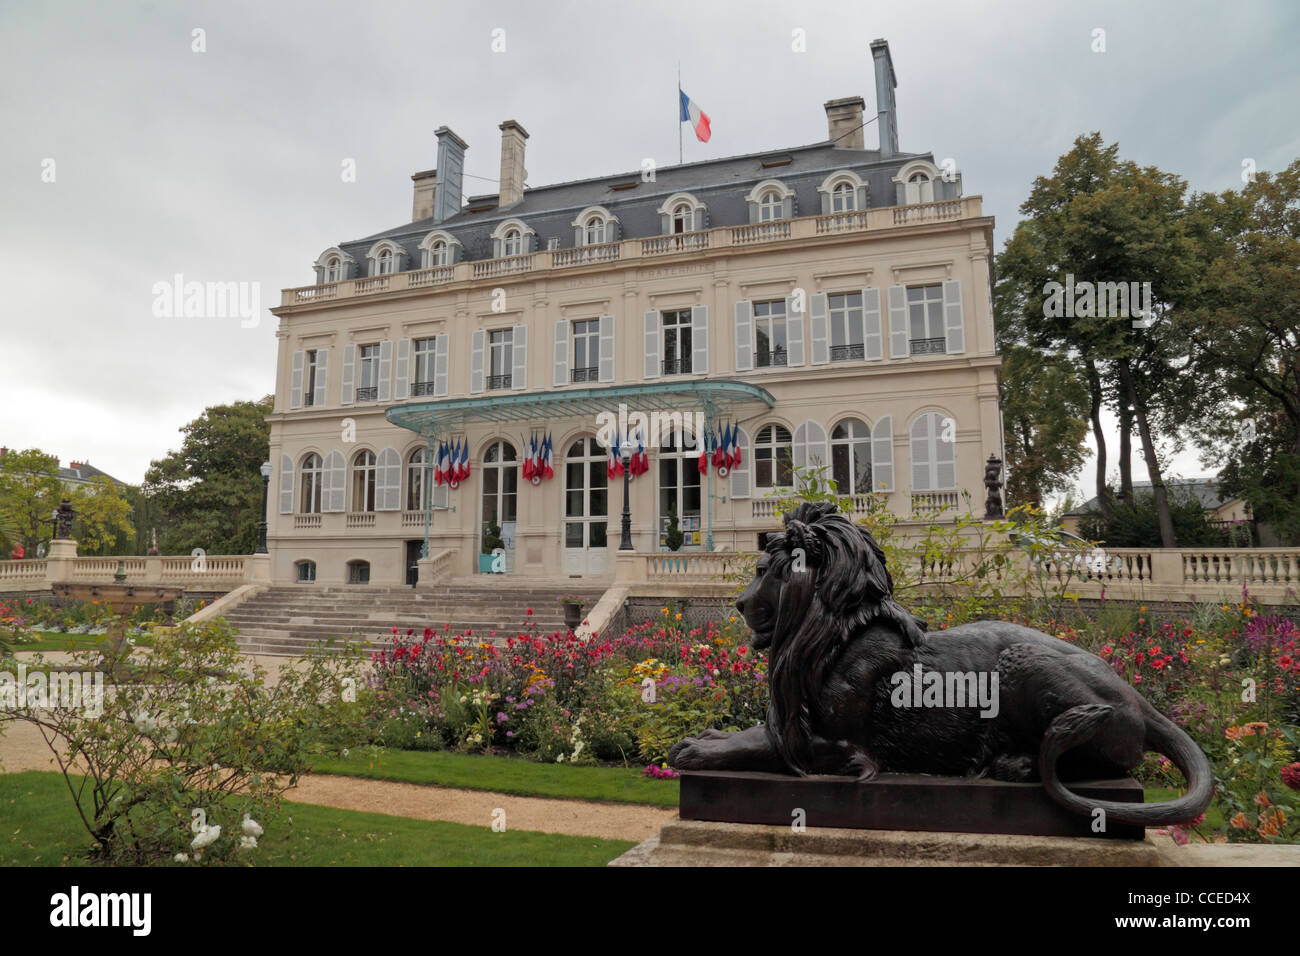 Rear garden view of the Hôtel de Ville (town hall) in Épernay, Champagne-Ardenne, Marne, France. Stock Photo